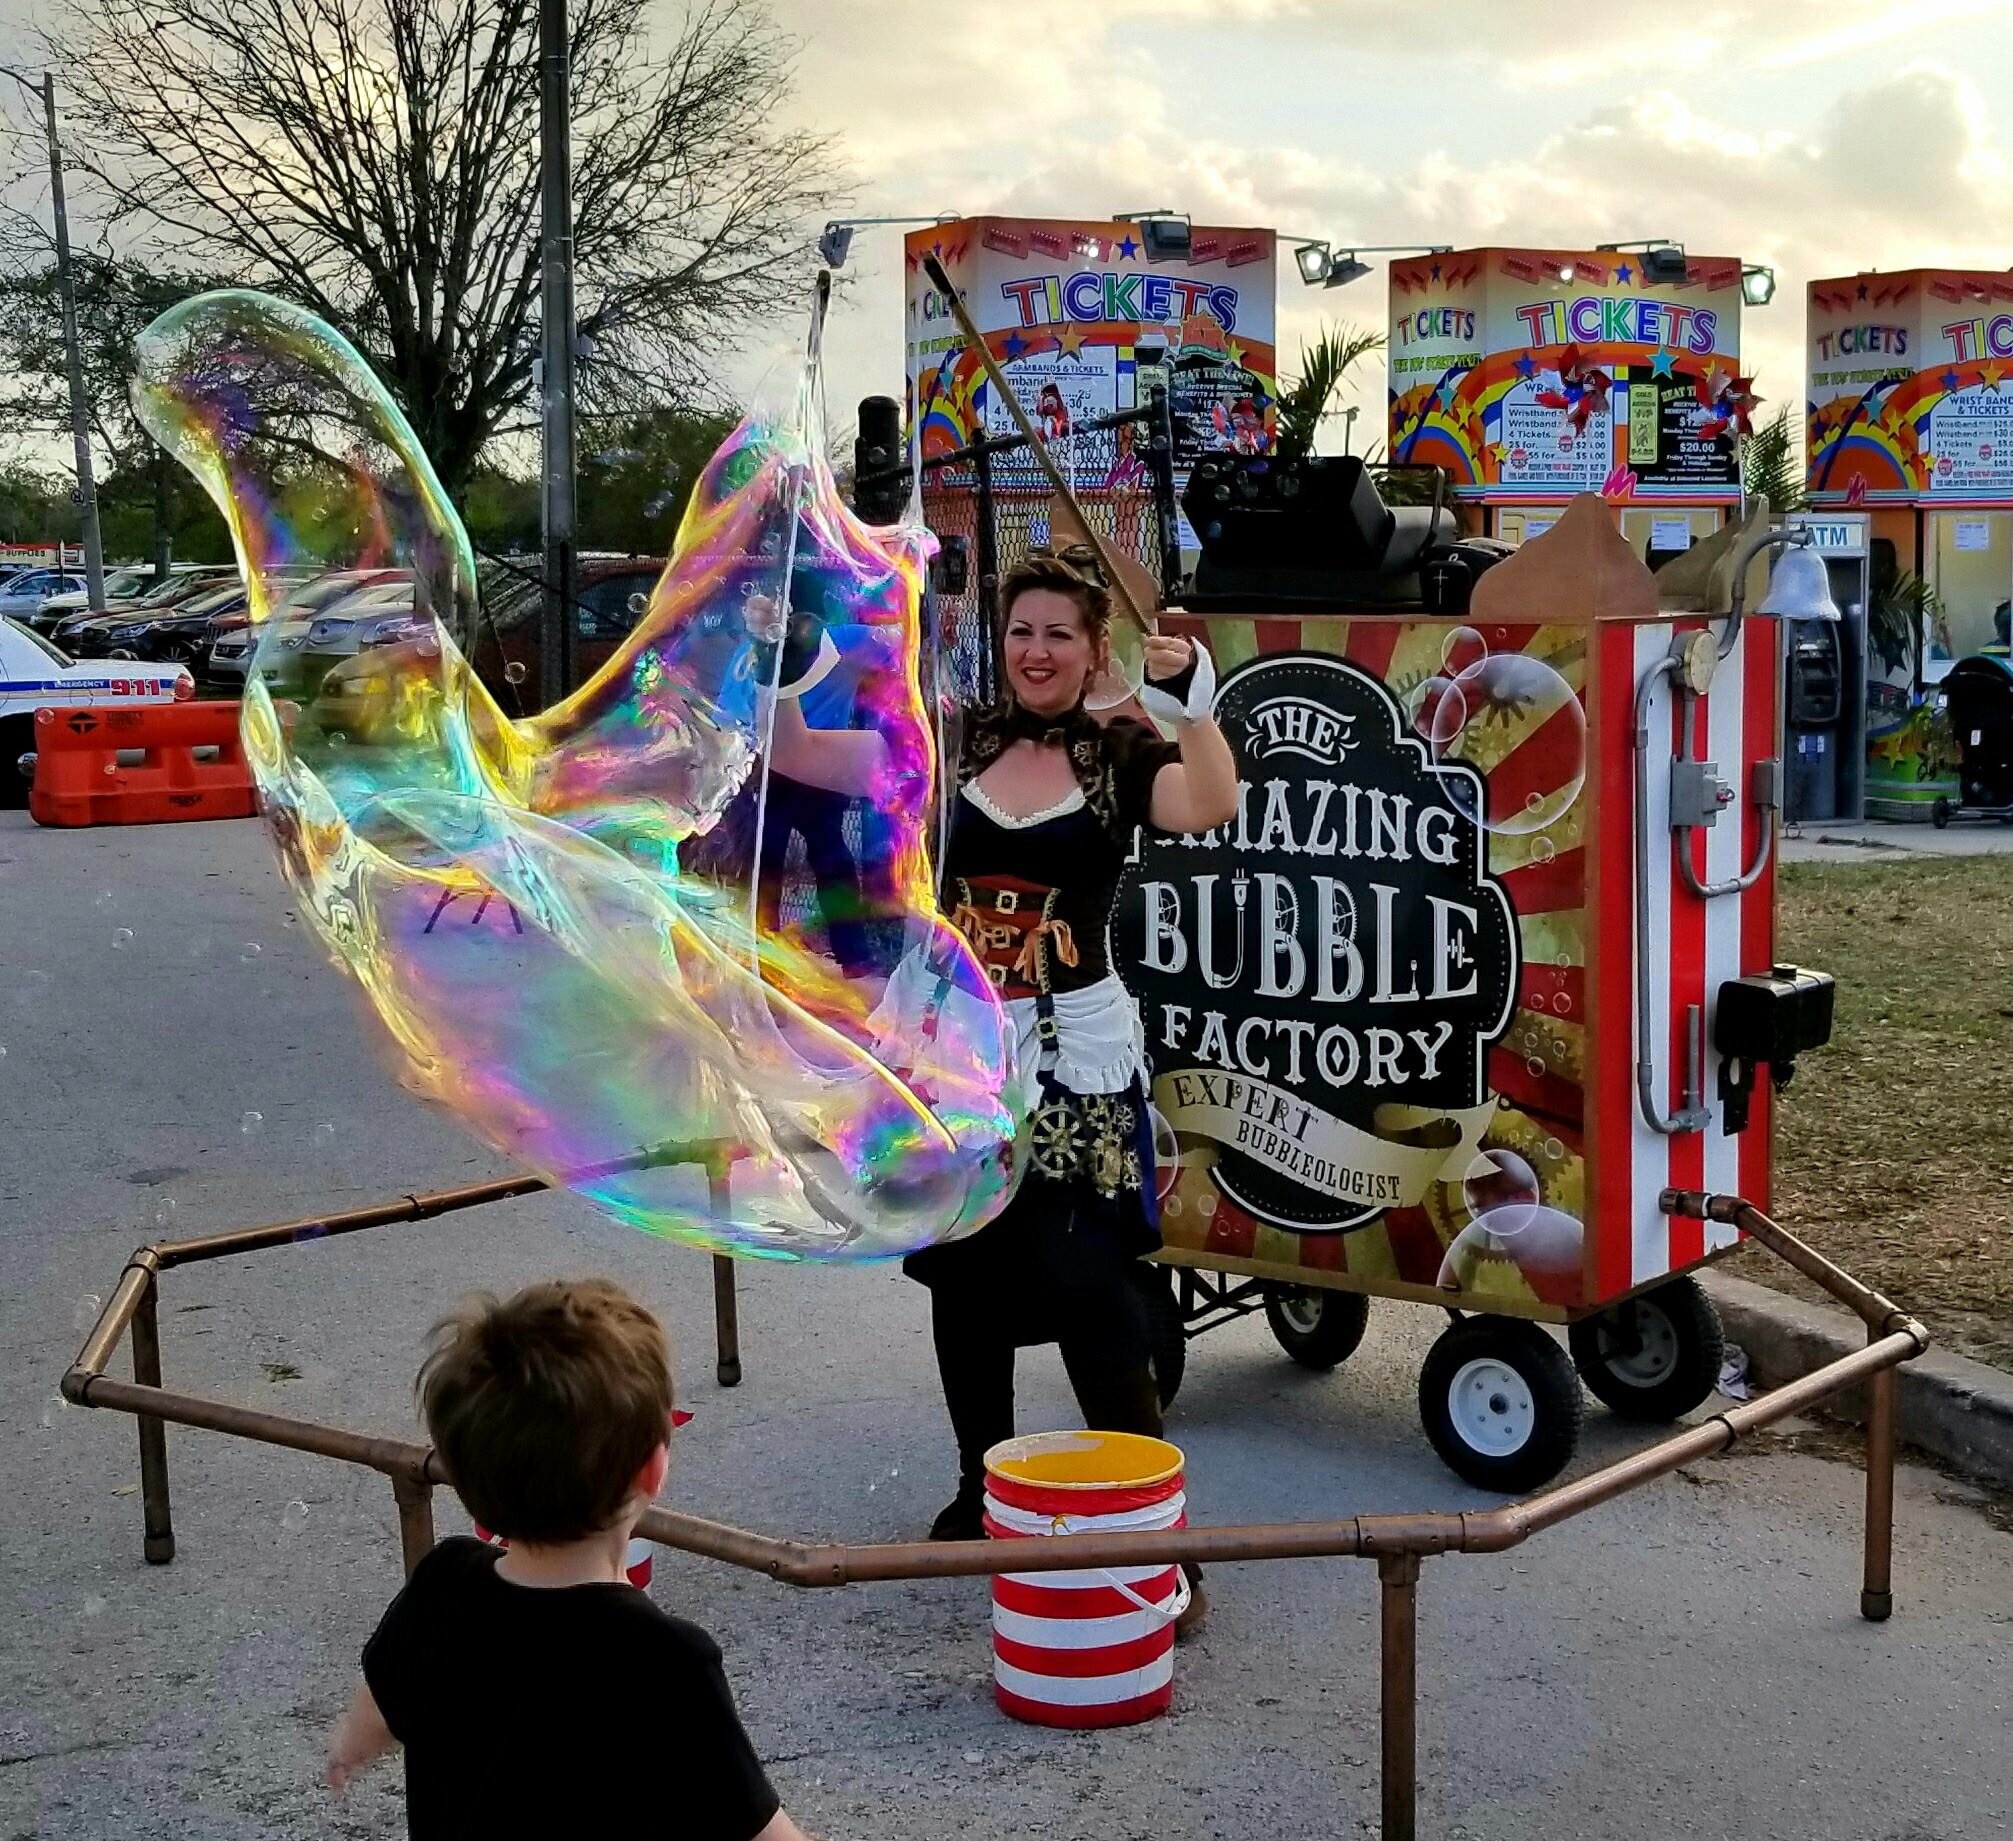 Bubble Factory, The Amazing — Artists &amp; Attractions - Entertainment ...